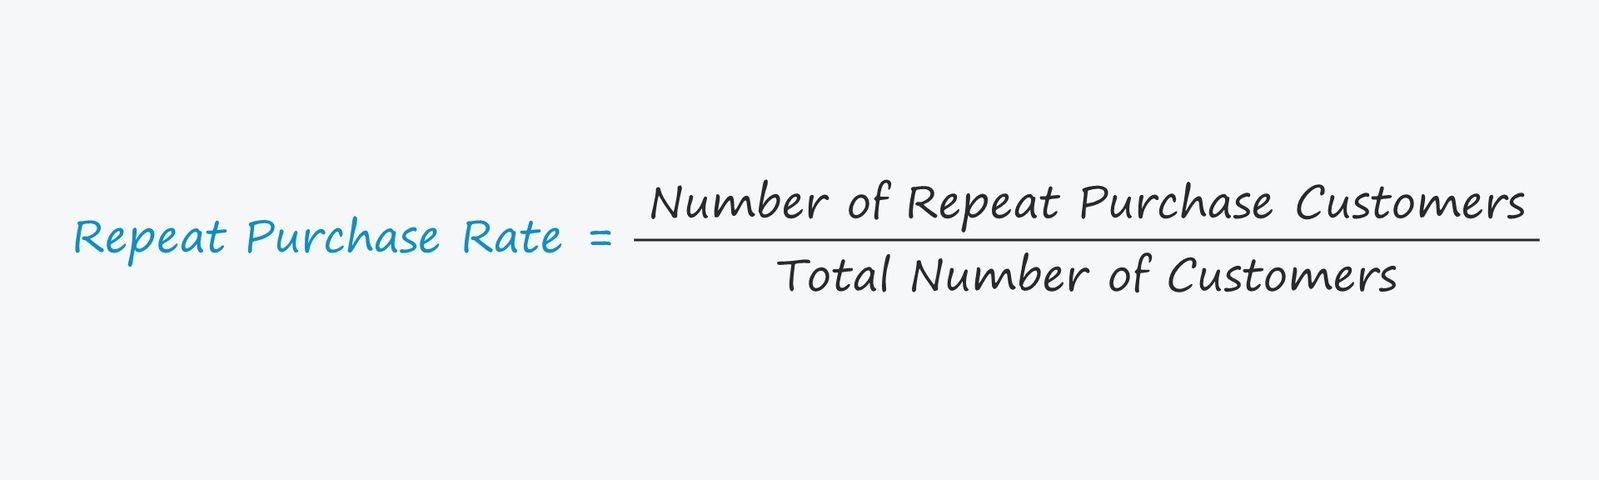 Repeat Purchase Rate Formula